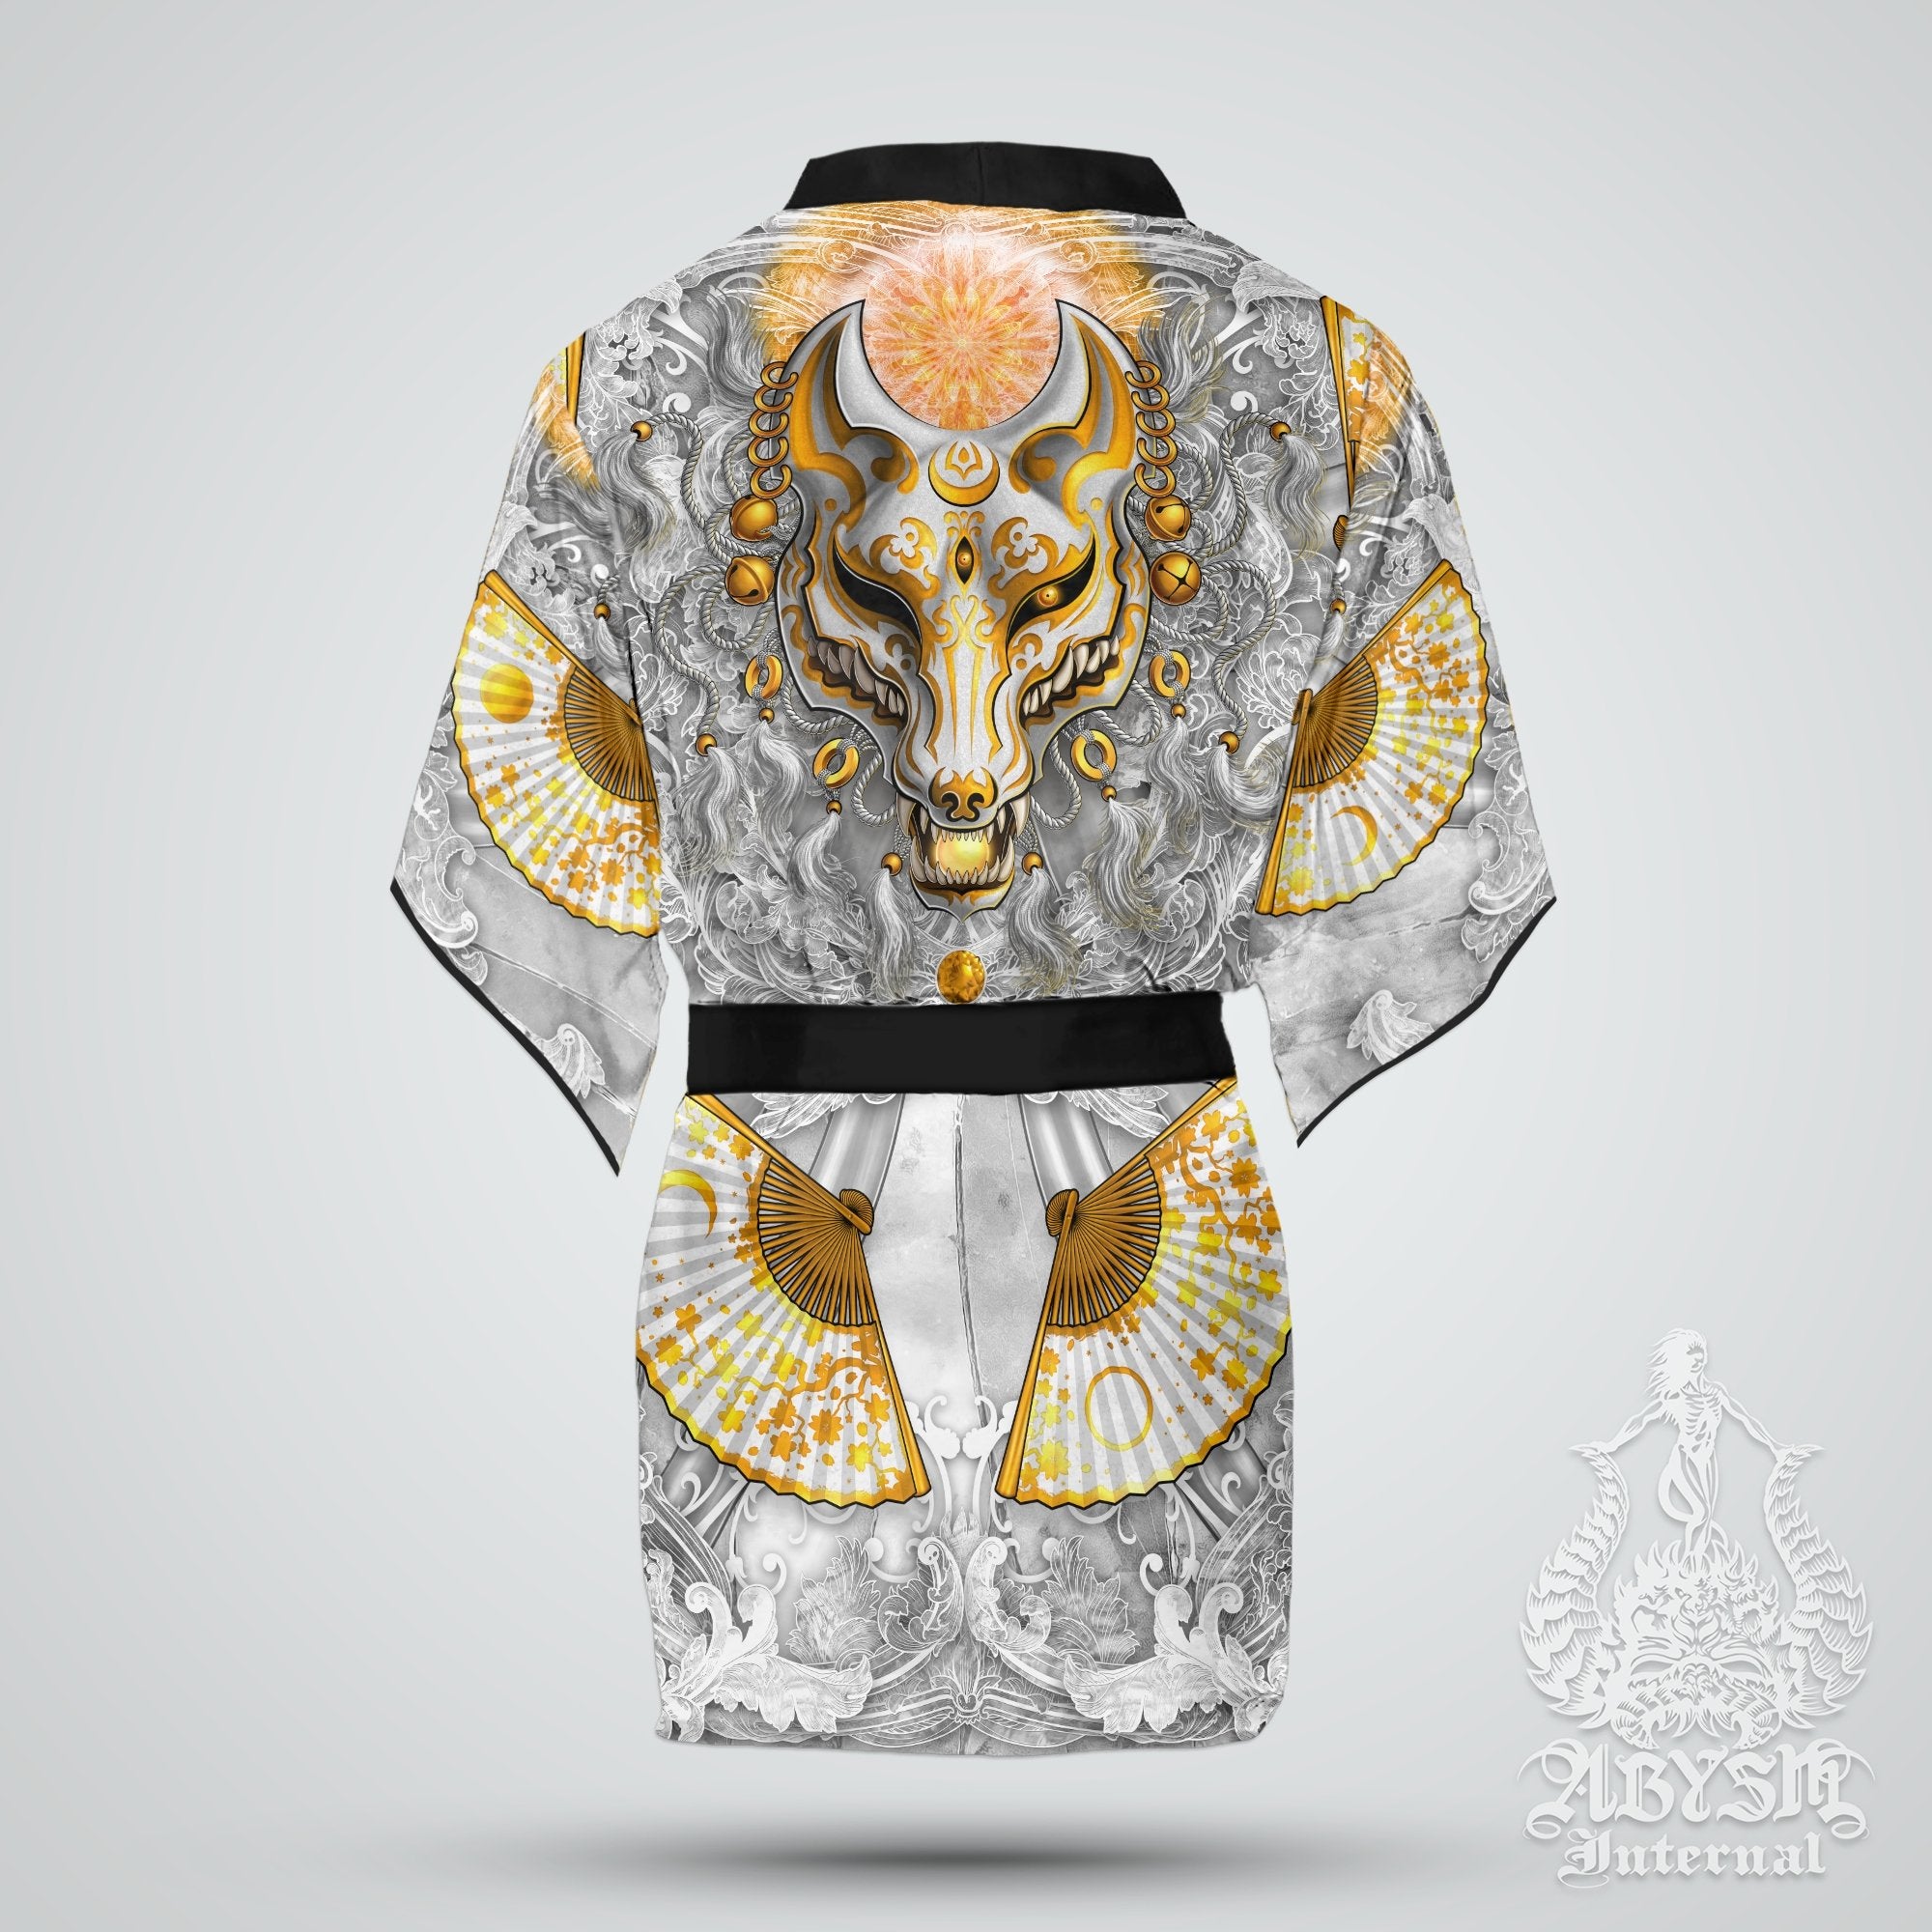 Kitsune Cover Up, Beach Outfit, Japanese Party Kimono, Summer Festival Robe, Indie and Alternative Clothing, Unisex - Fox Mask, White Gold - Abysm Internal